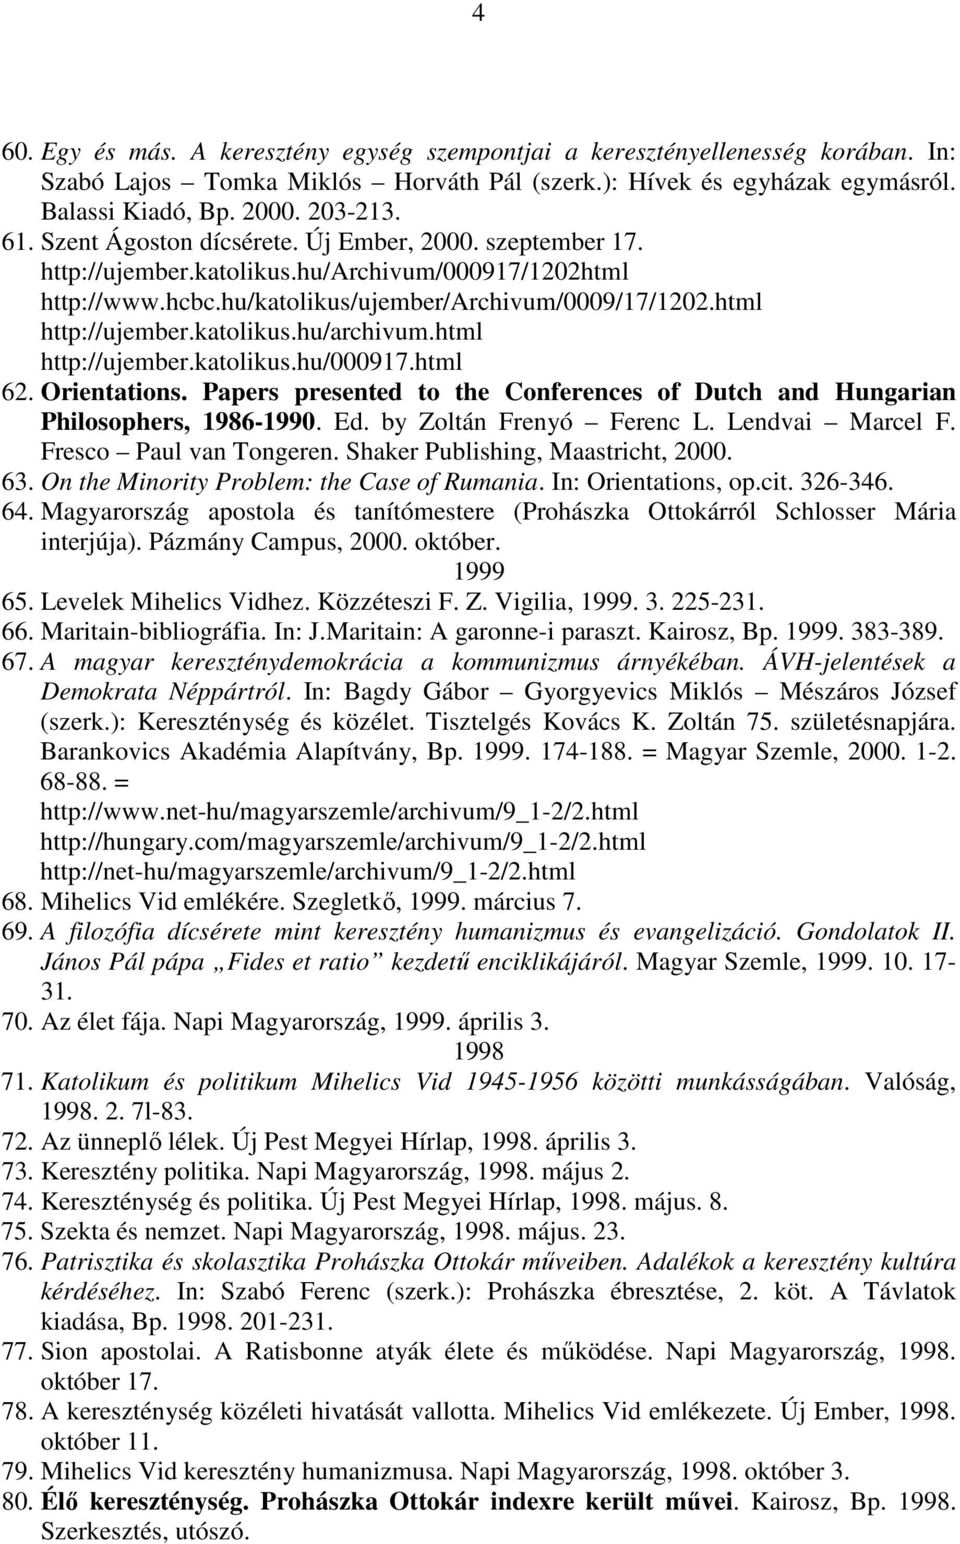 html 62. Orientations. Papers presented to the Conferences of Dutch and Hungarian Philosophers, 1986-1990. Ed. by Zoltán Frenyó Ferenc L. Lendvai Marcel F. Fresco Paul van Tongeren.